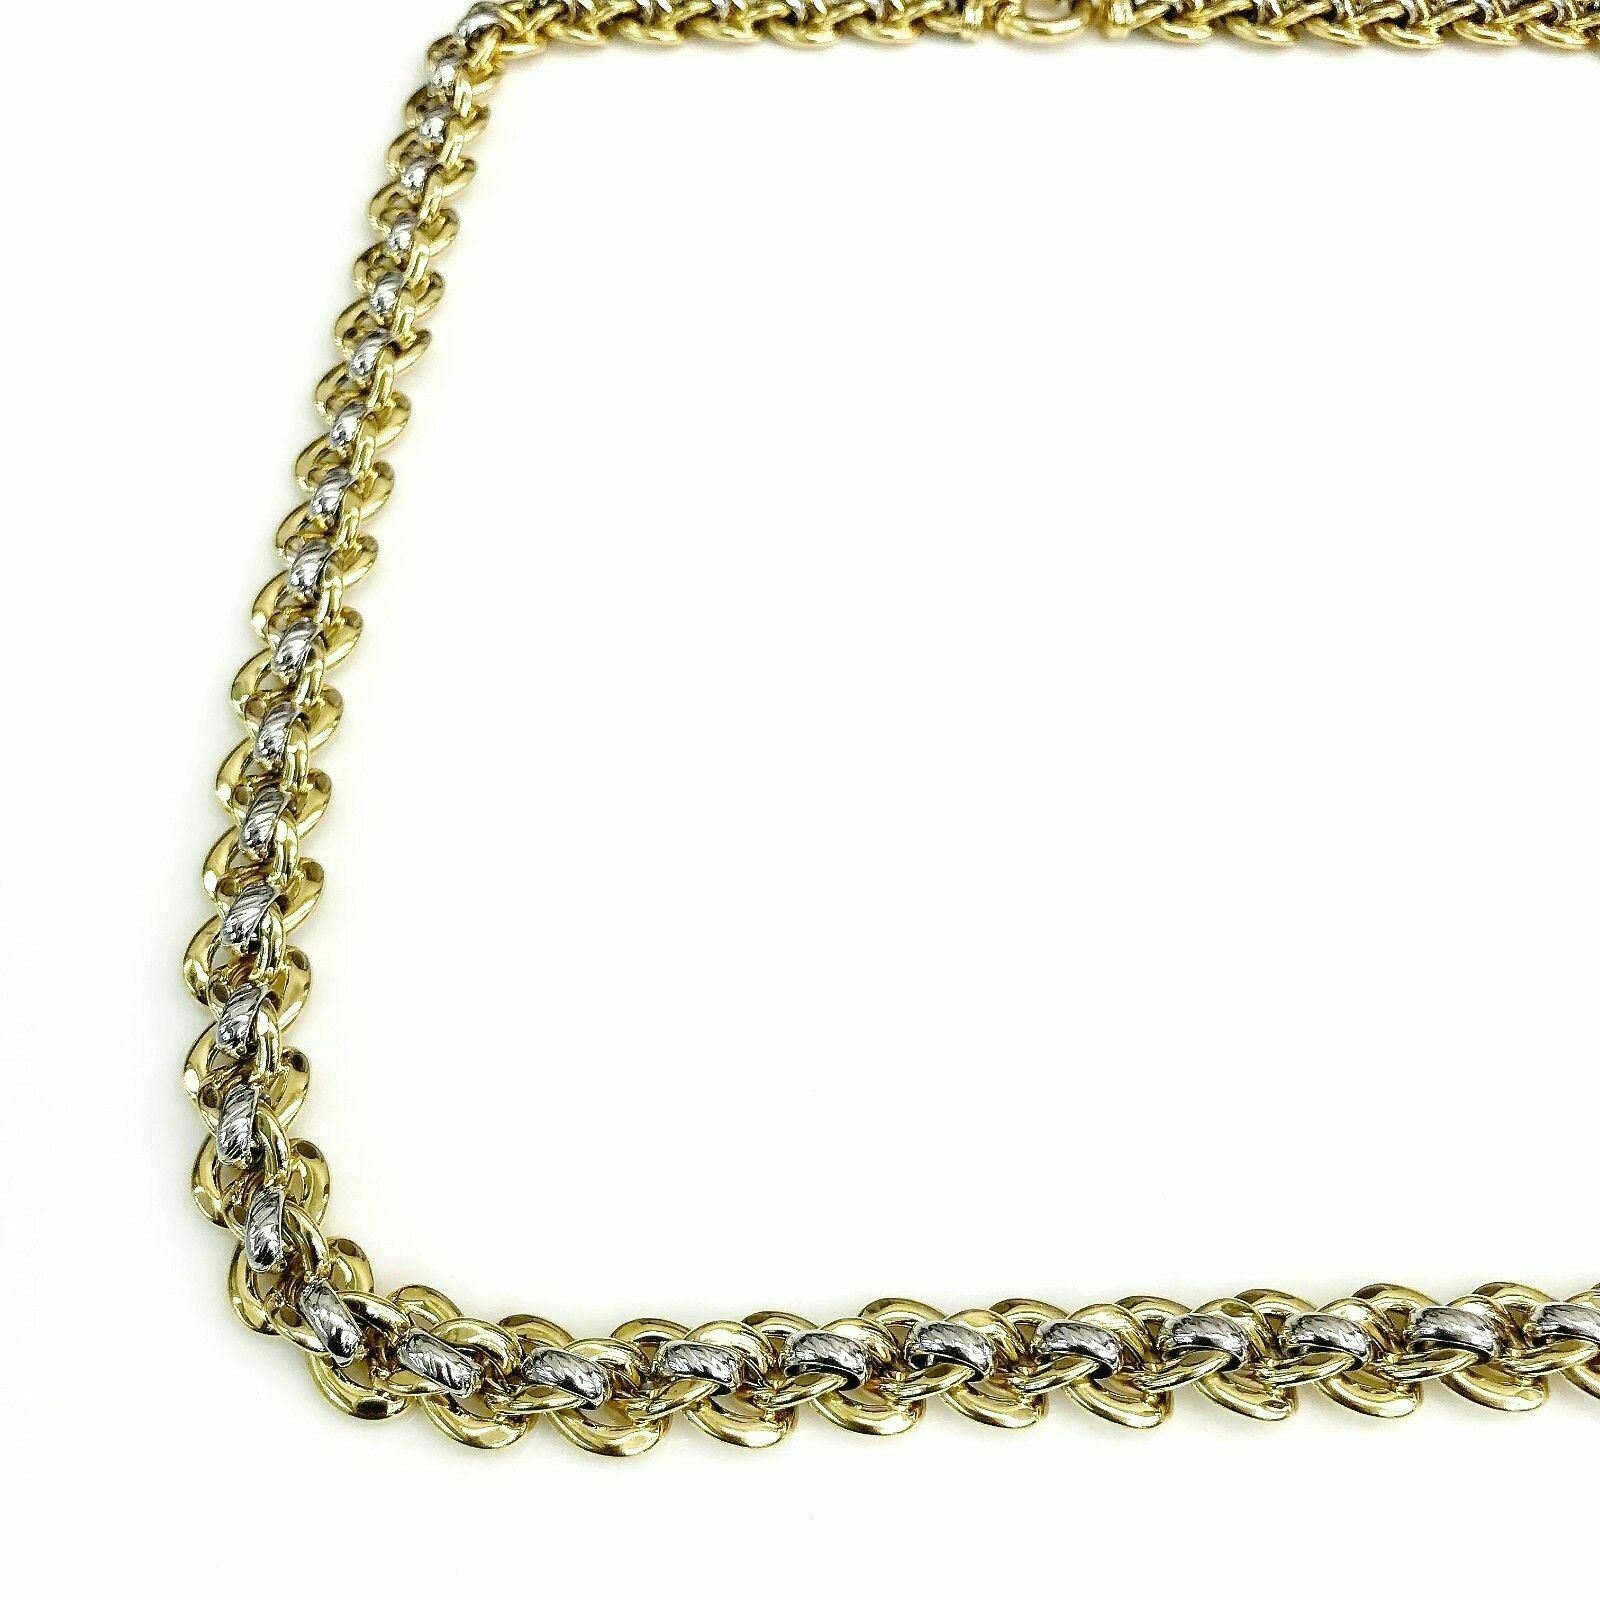 Solid 14K Gold 2Tone Gold Chain/Necklace 29.5 Inch 2.96 Ounces Made in Italy